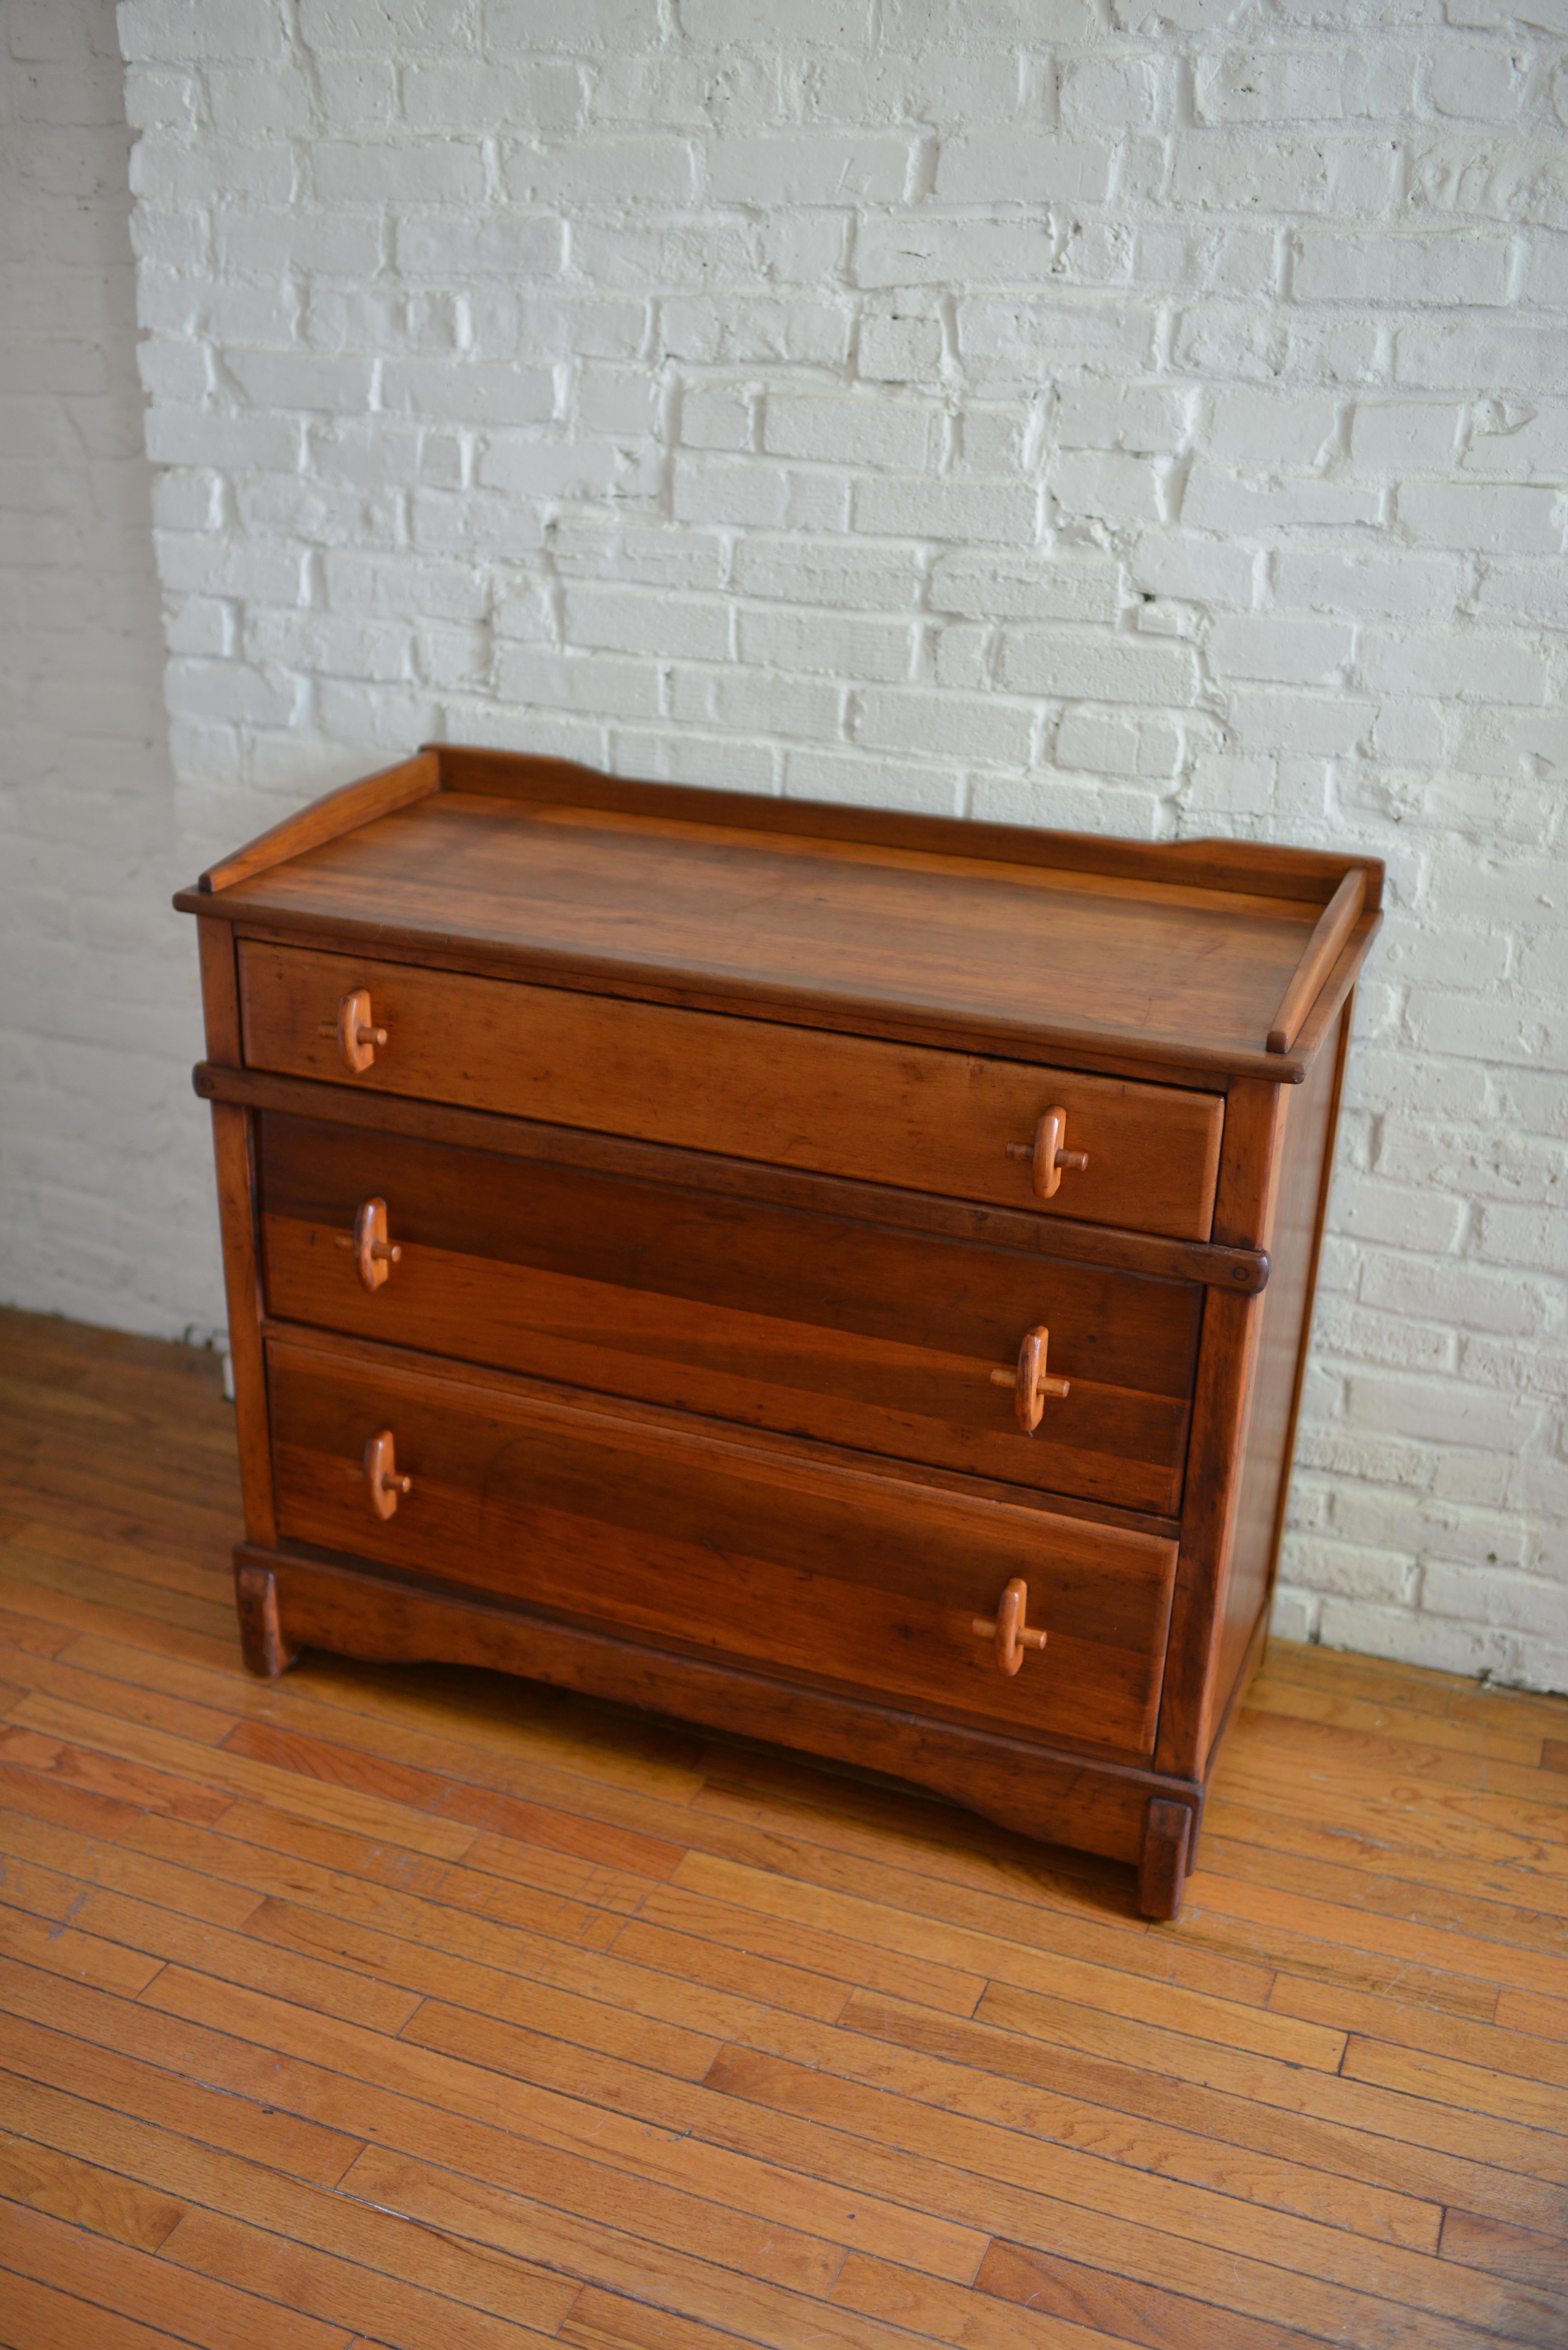 20th Century Antique Chest of Drawers with Cross Handle Pulls